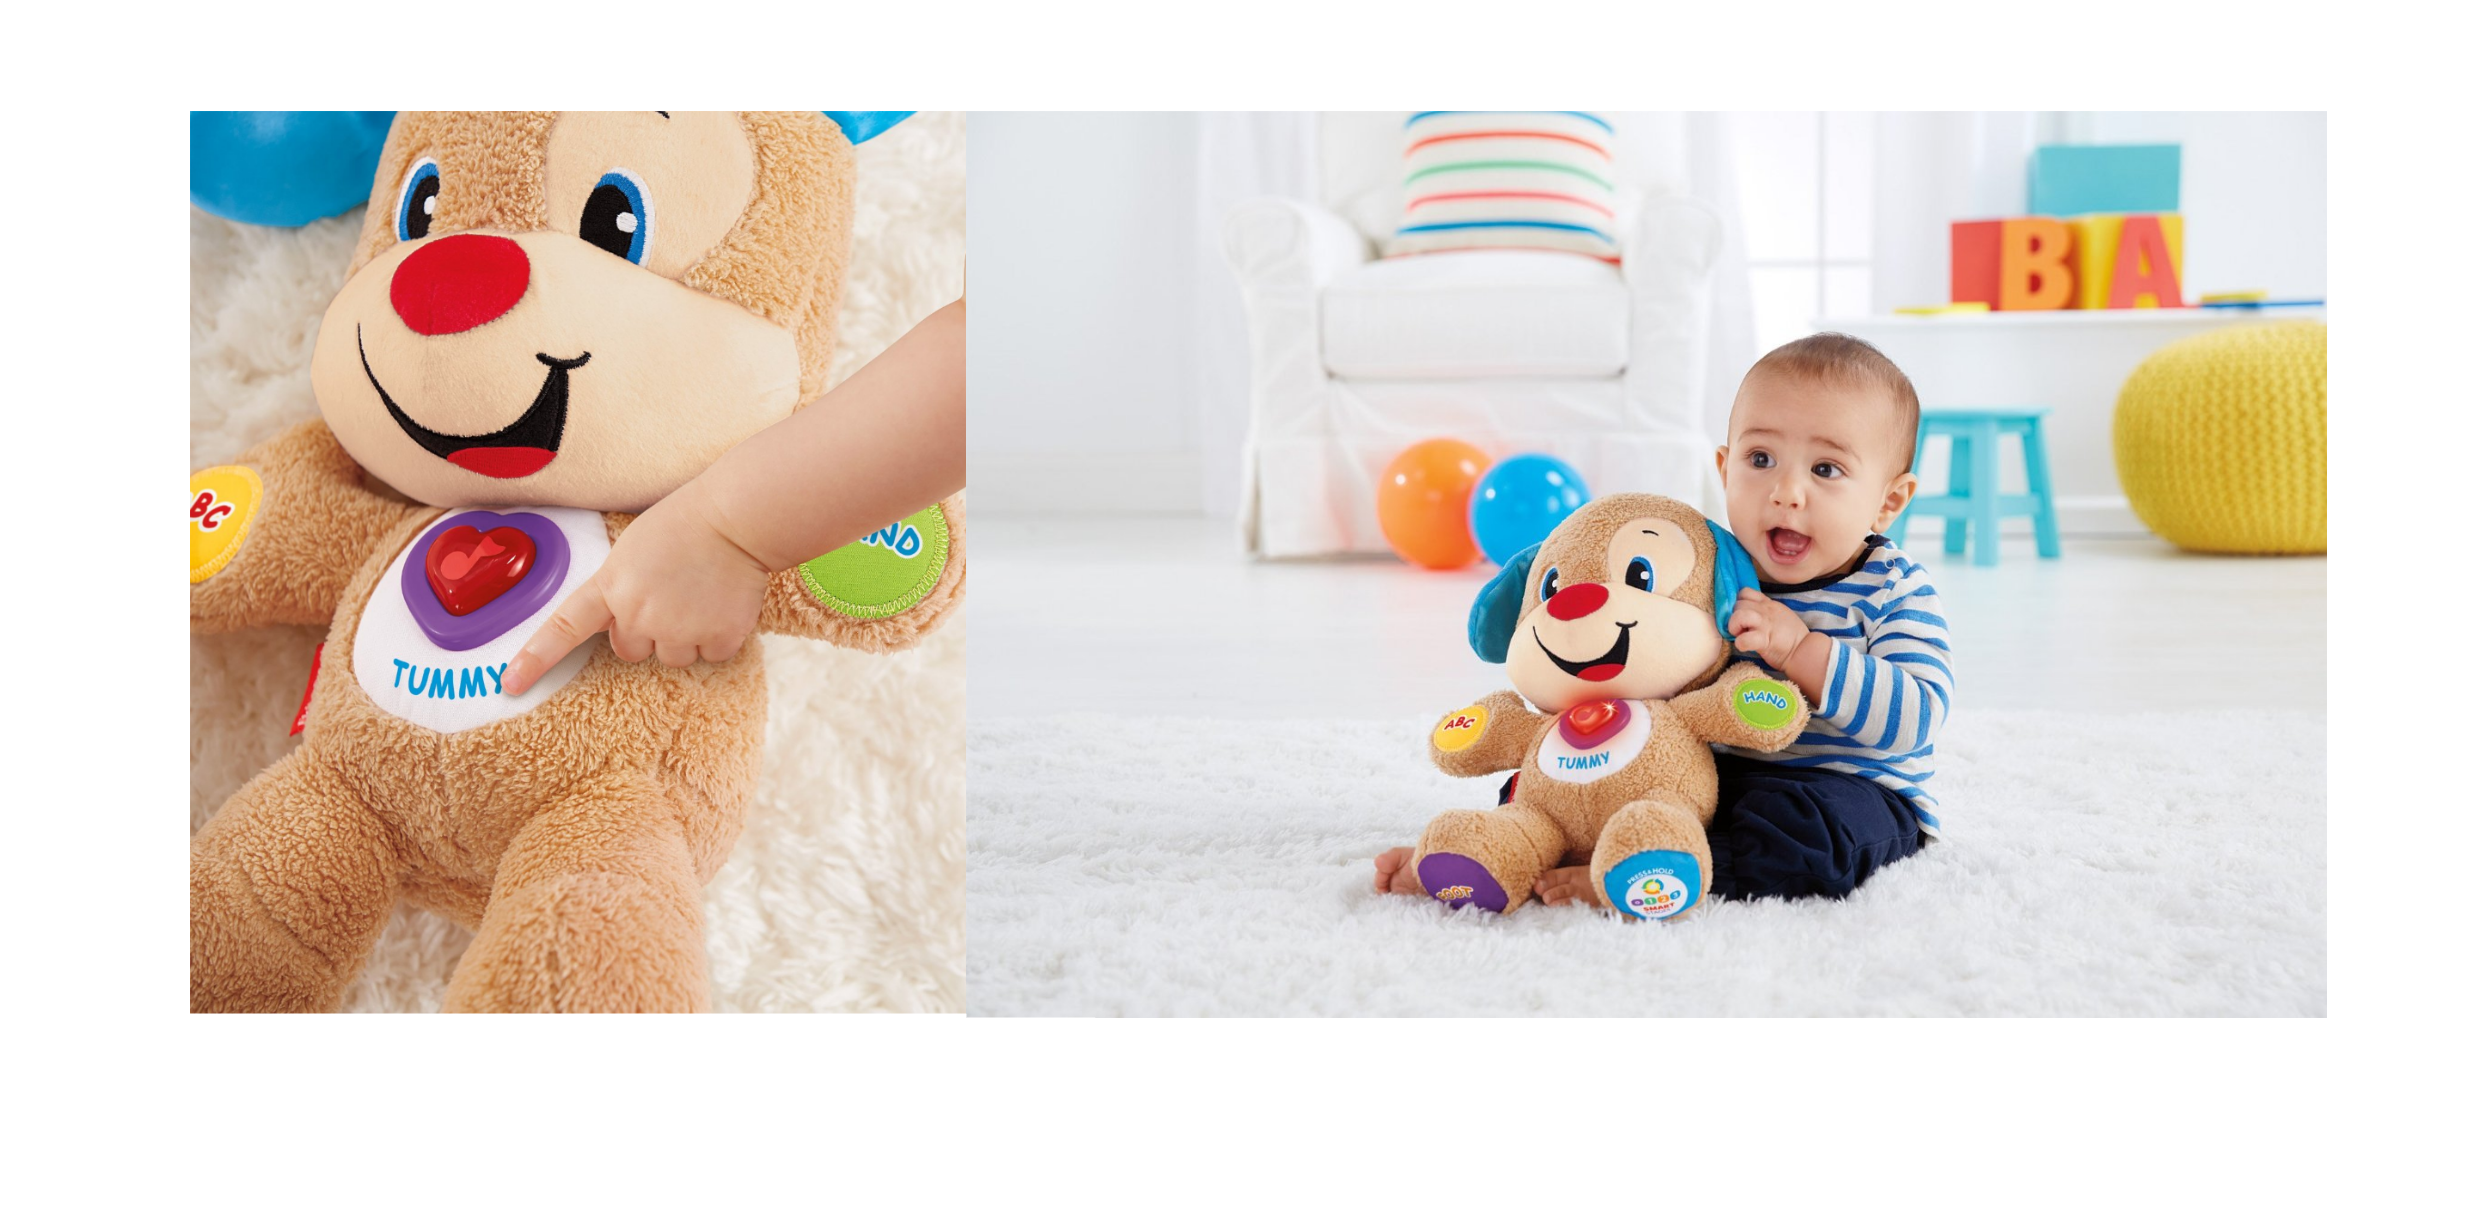 Fisher-Price Laugh & Learn Smart Stages Puppy Only $13.88!